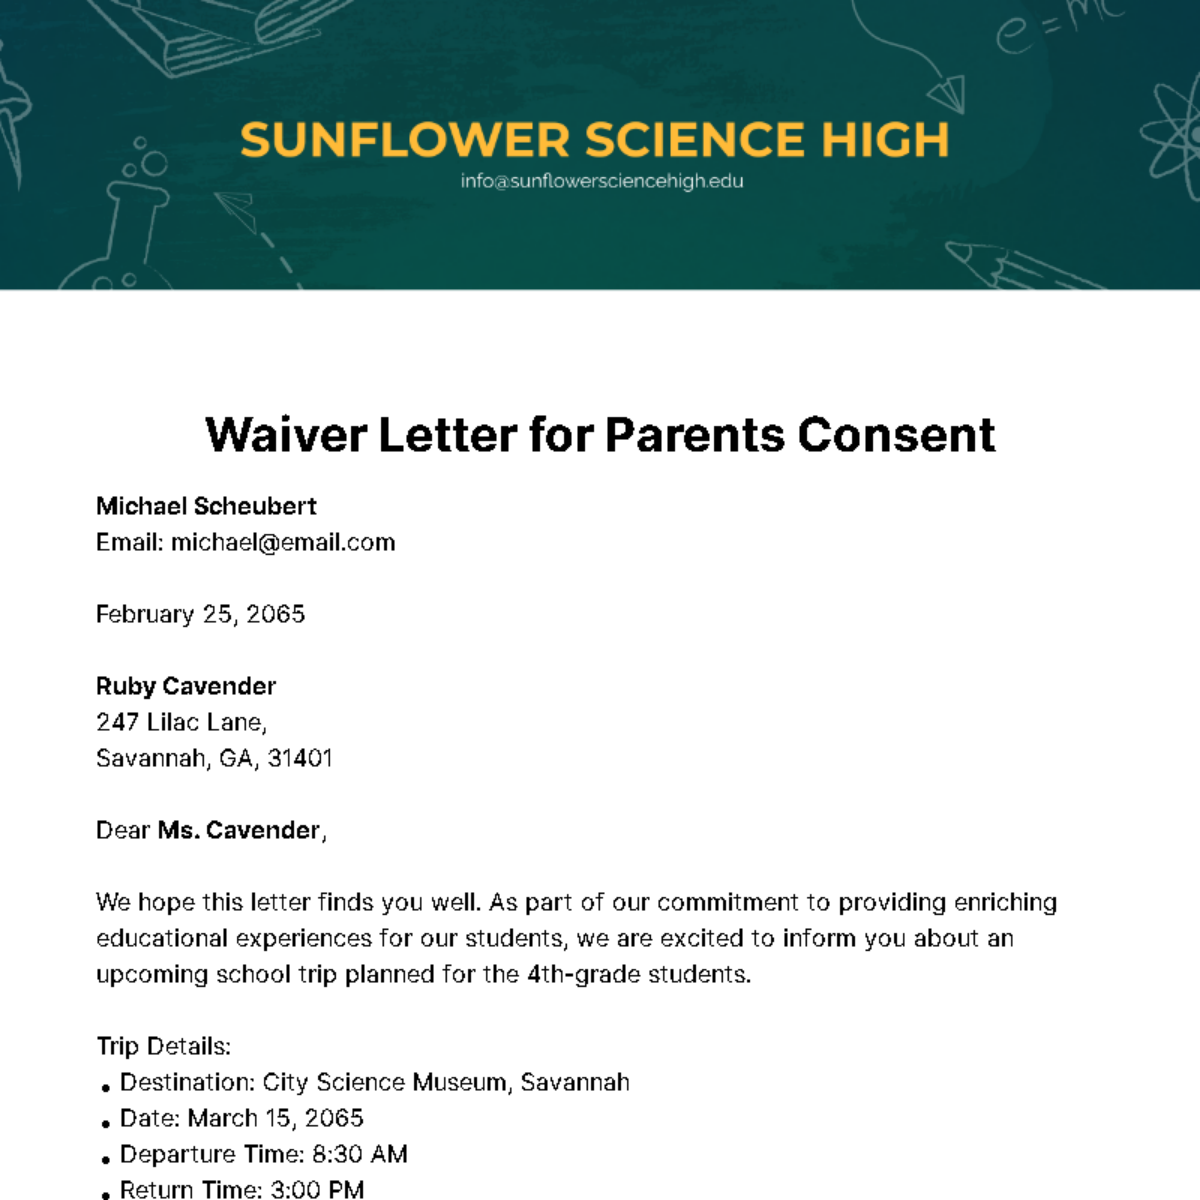 Waiver Letter for Parents Consent Template